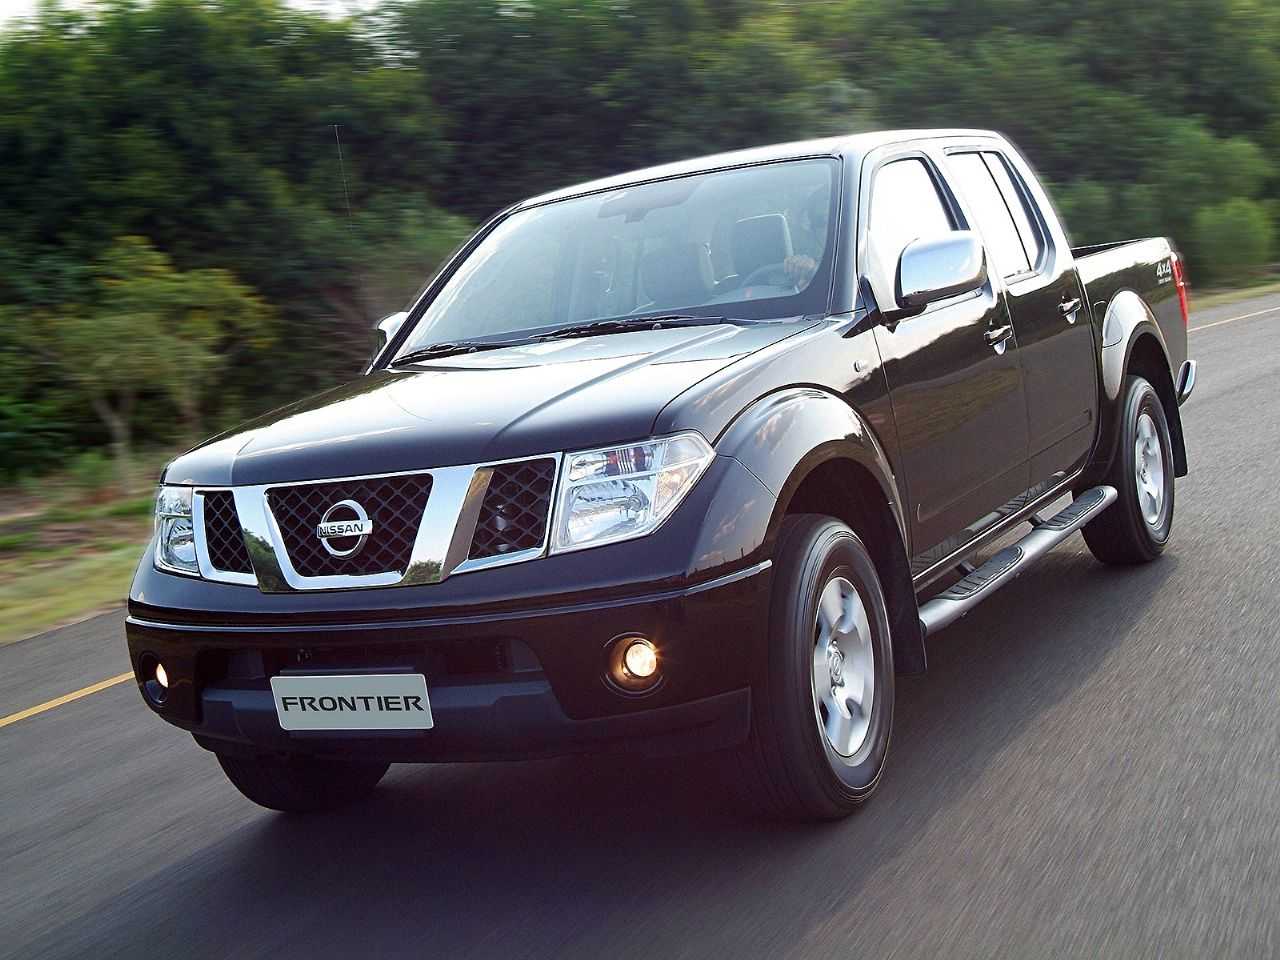 NissanFrontier 2007 - ngulo frontal